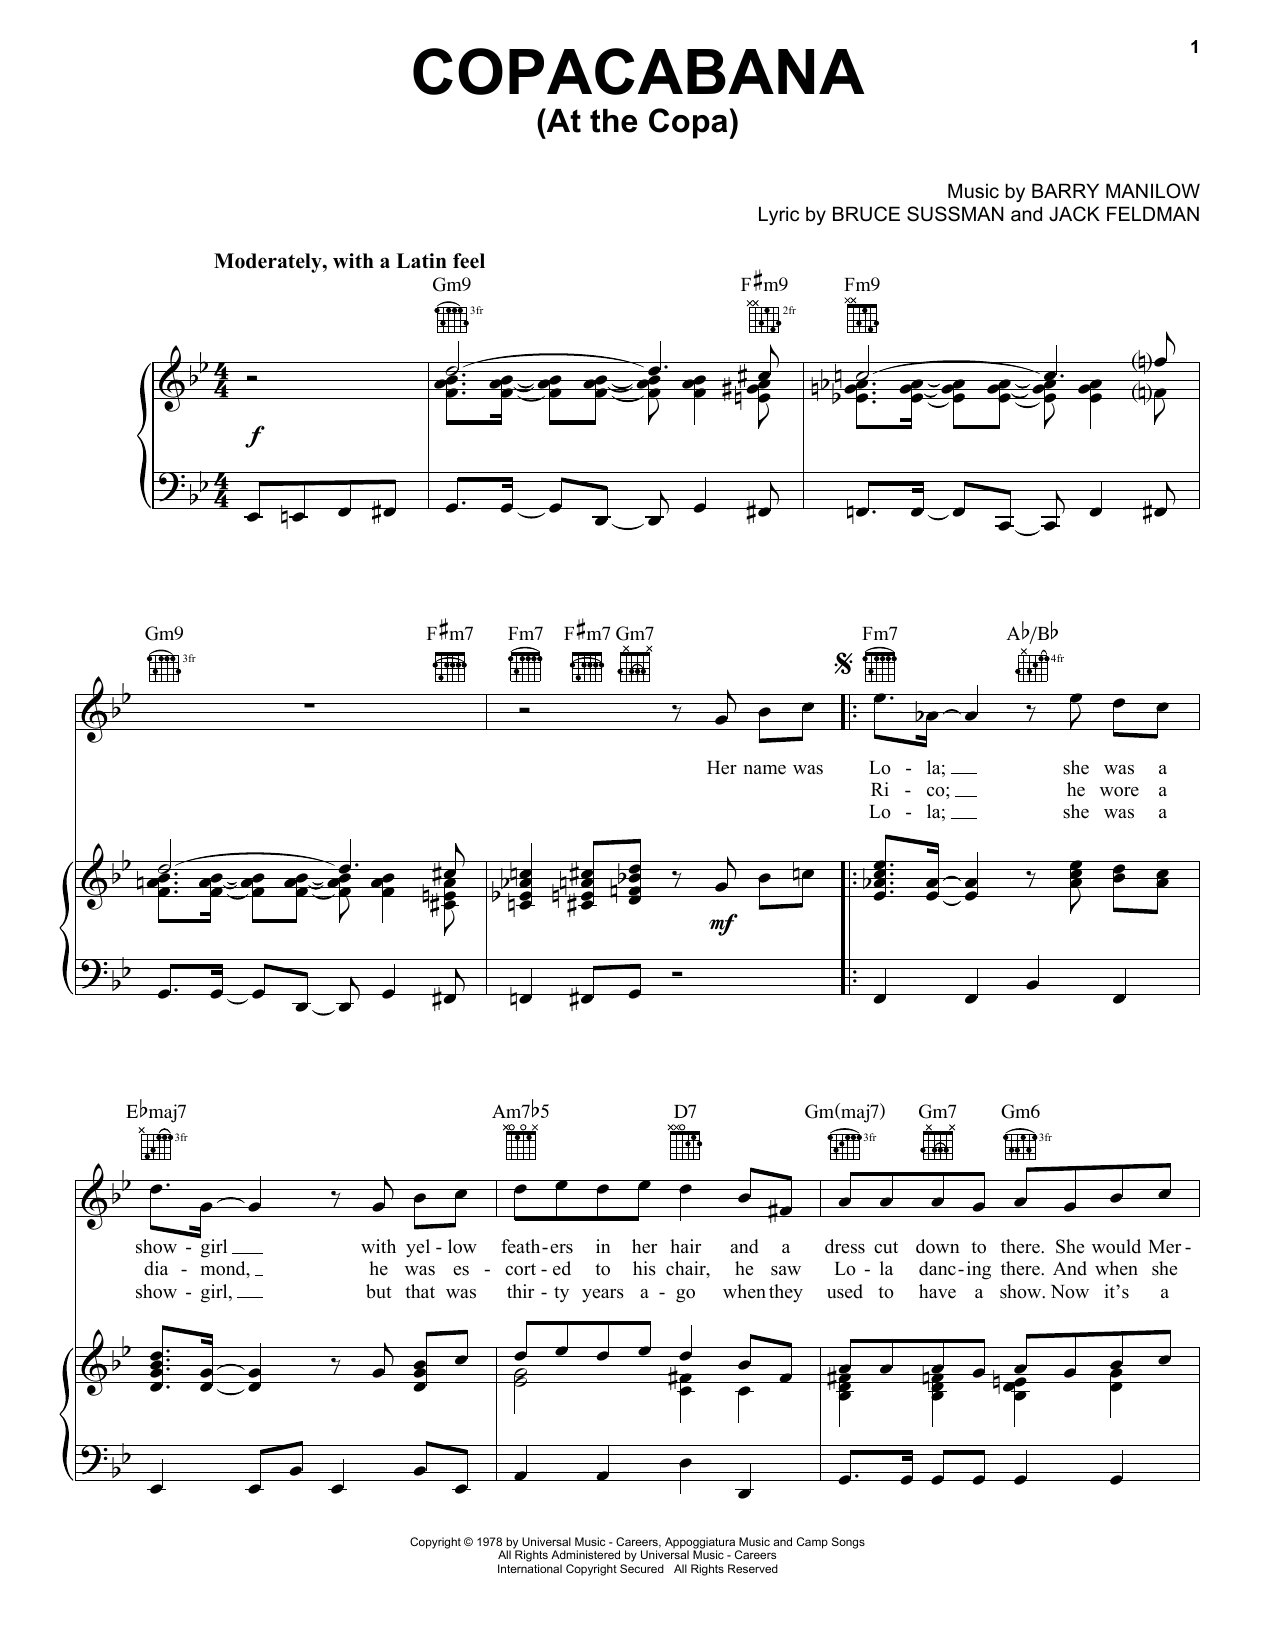 Barry Manilow Copacabana (At The Copa) sheet music notes printable PDF score